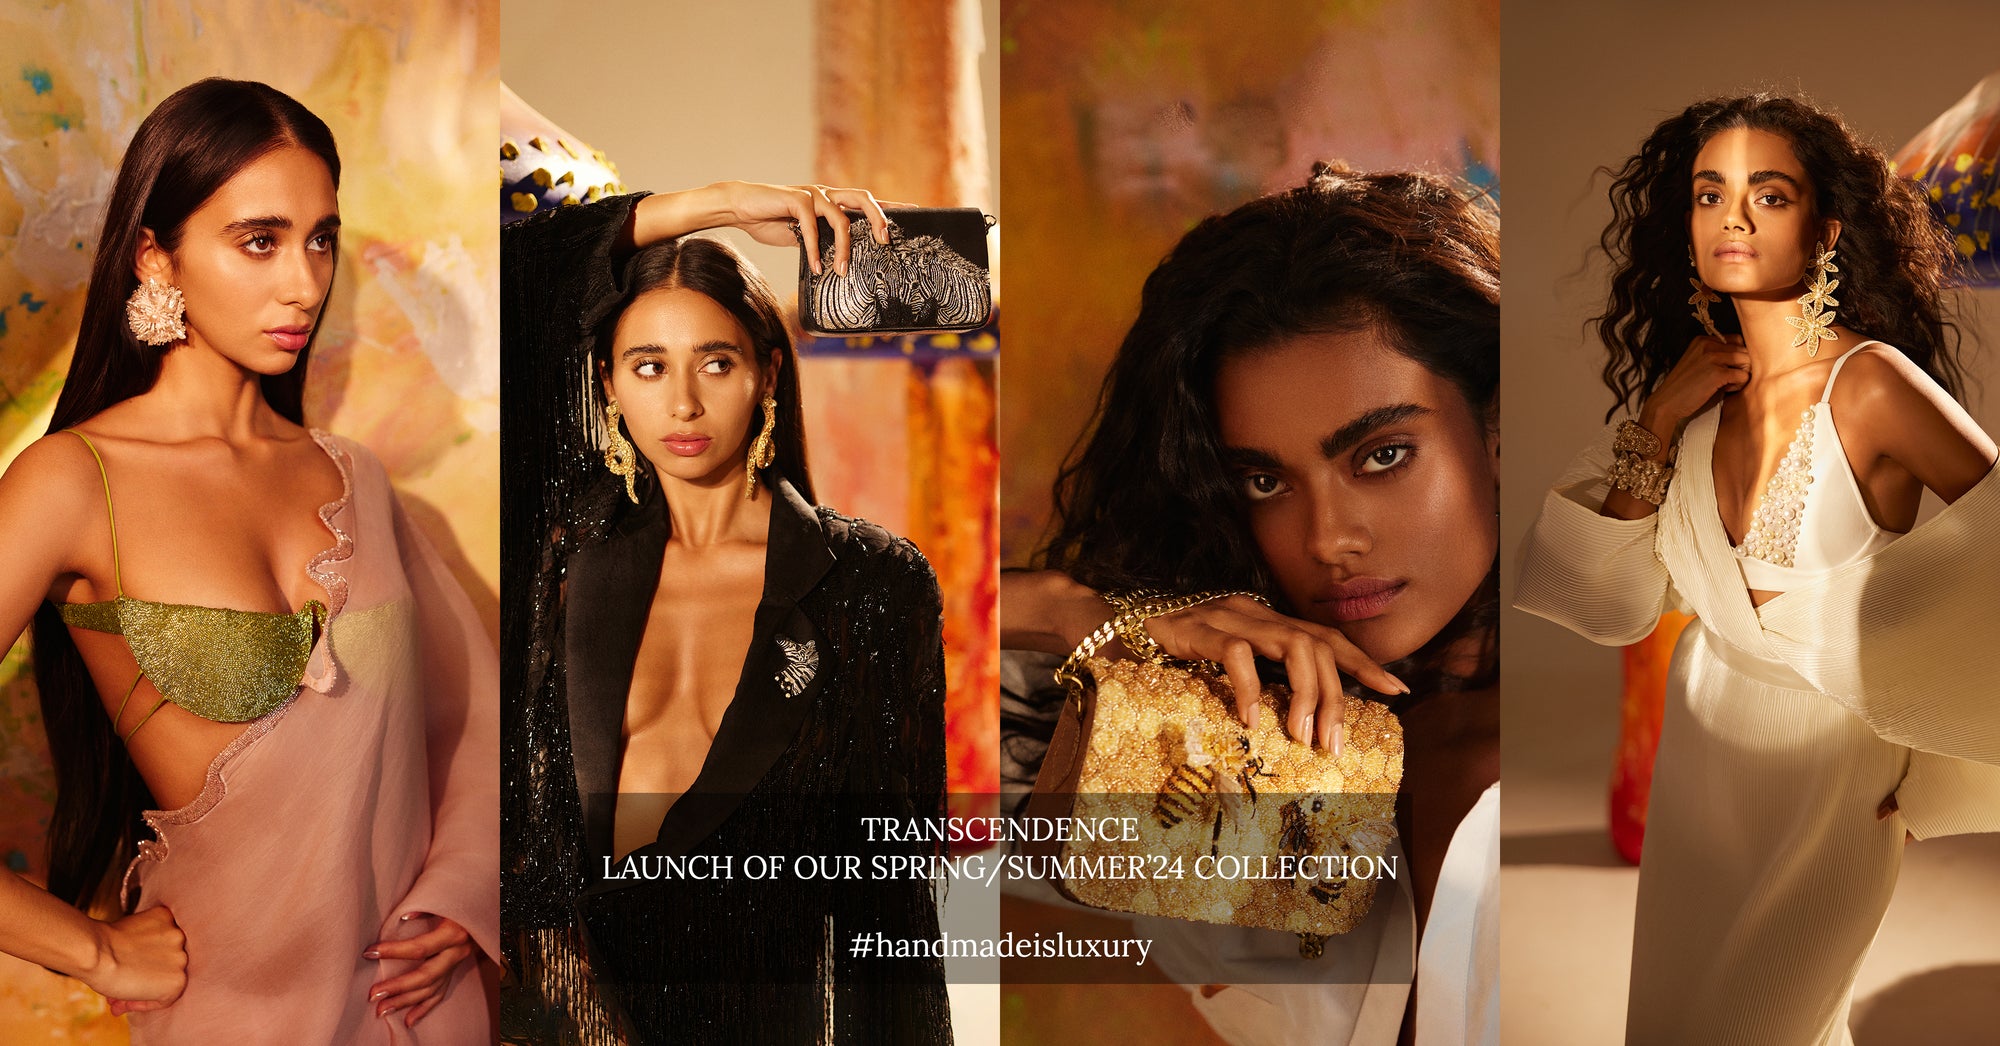 Campaign featuring our Transcendence collection